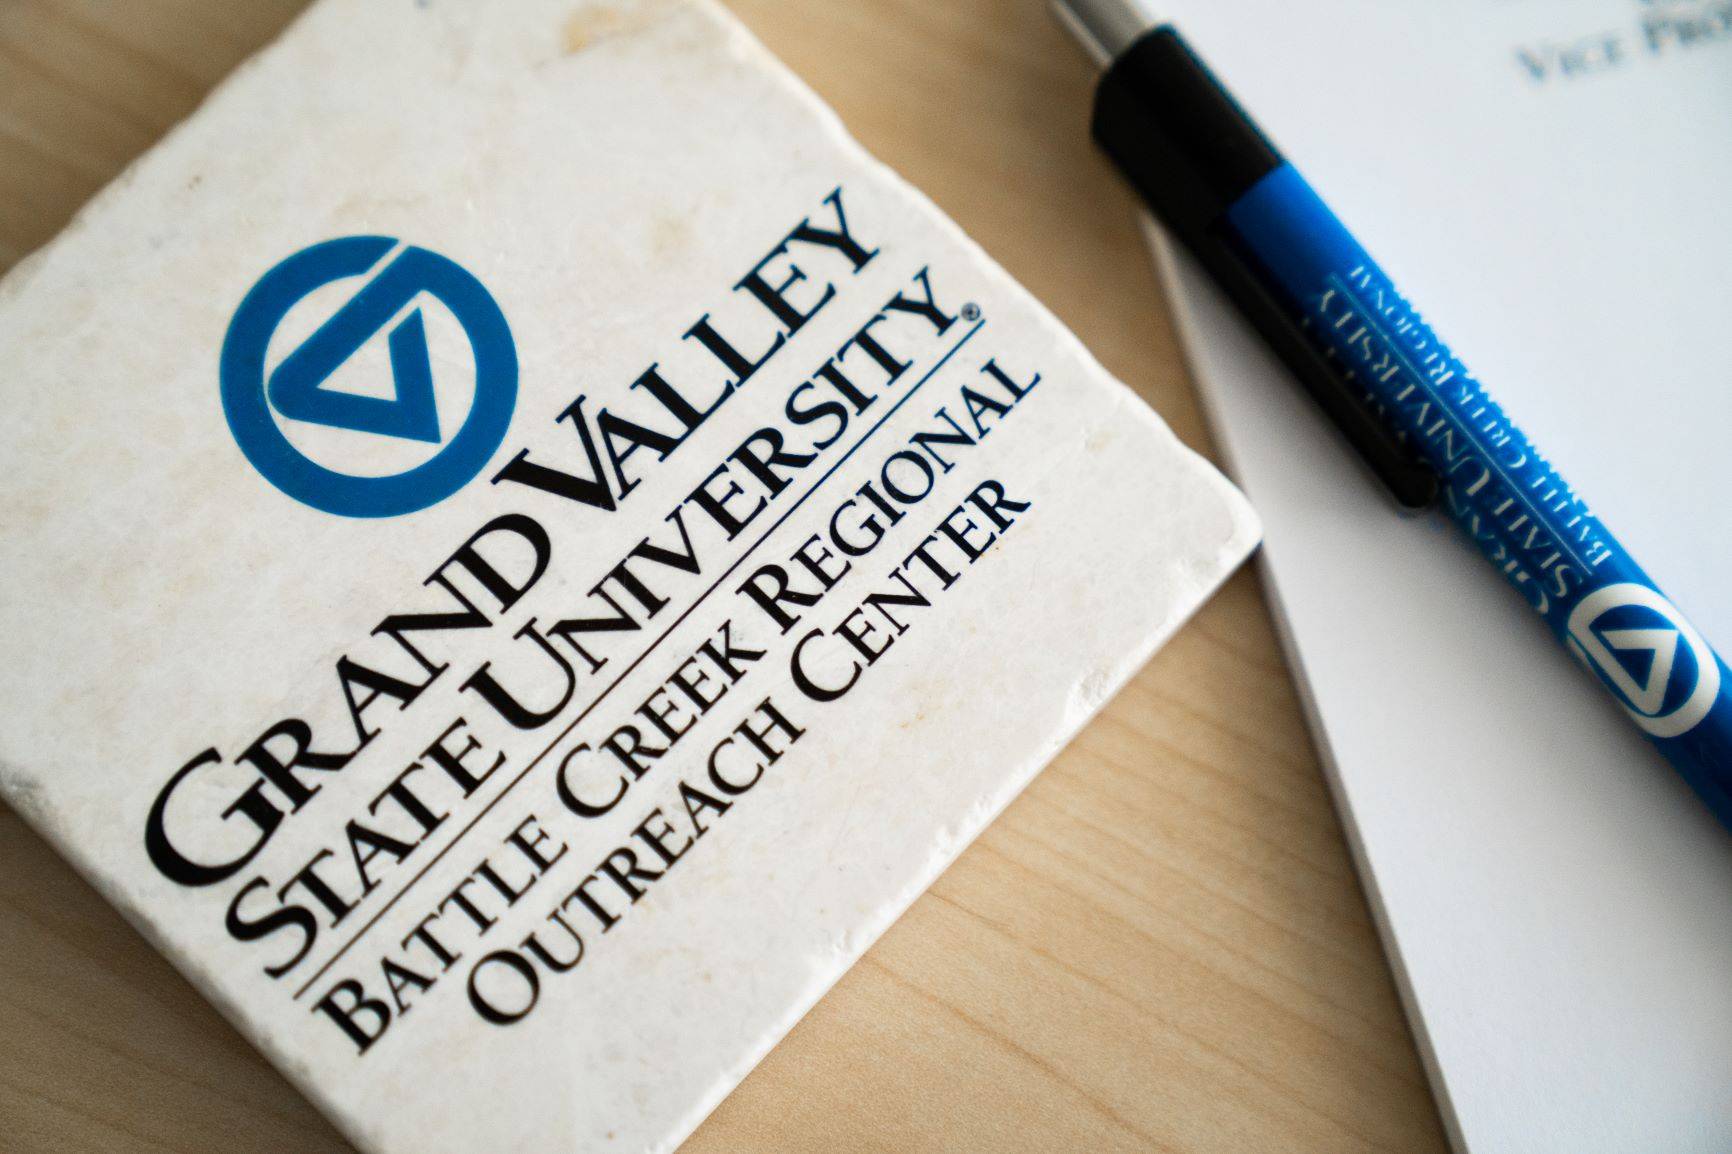 grand valley logo coaster on table with pen